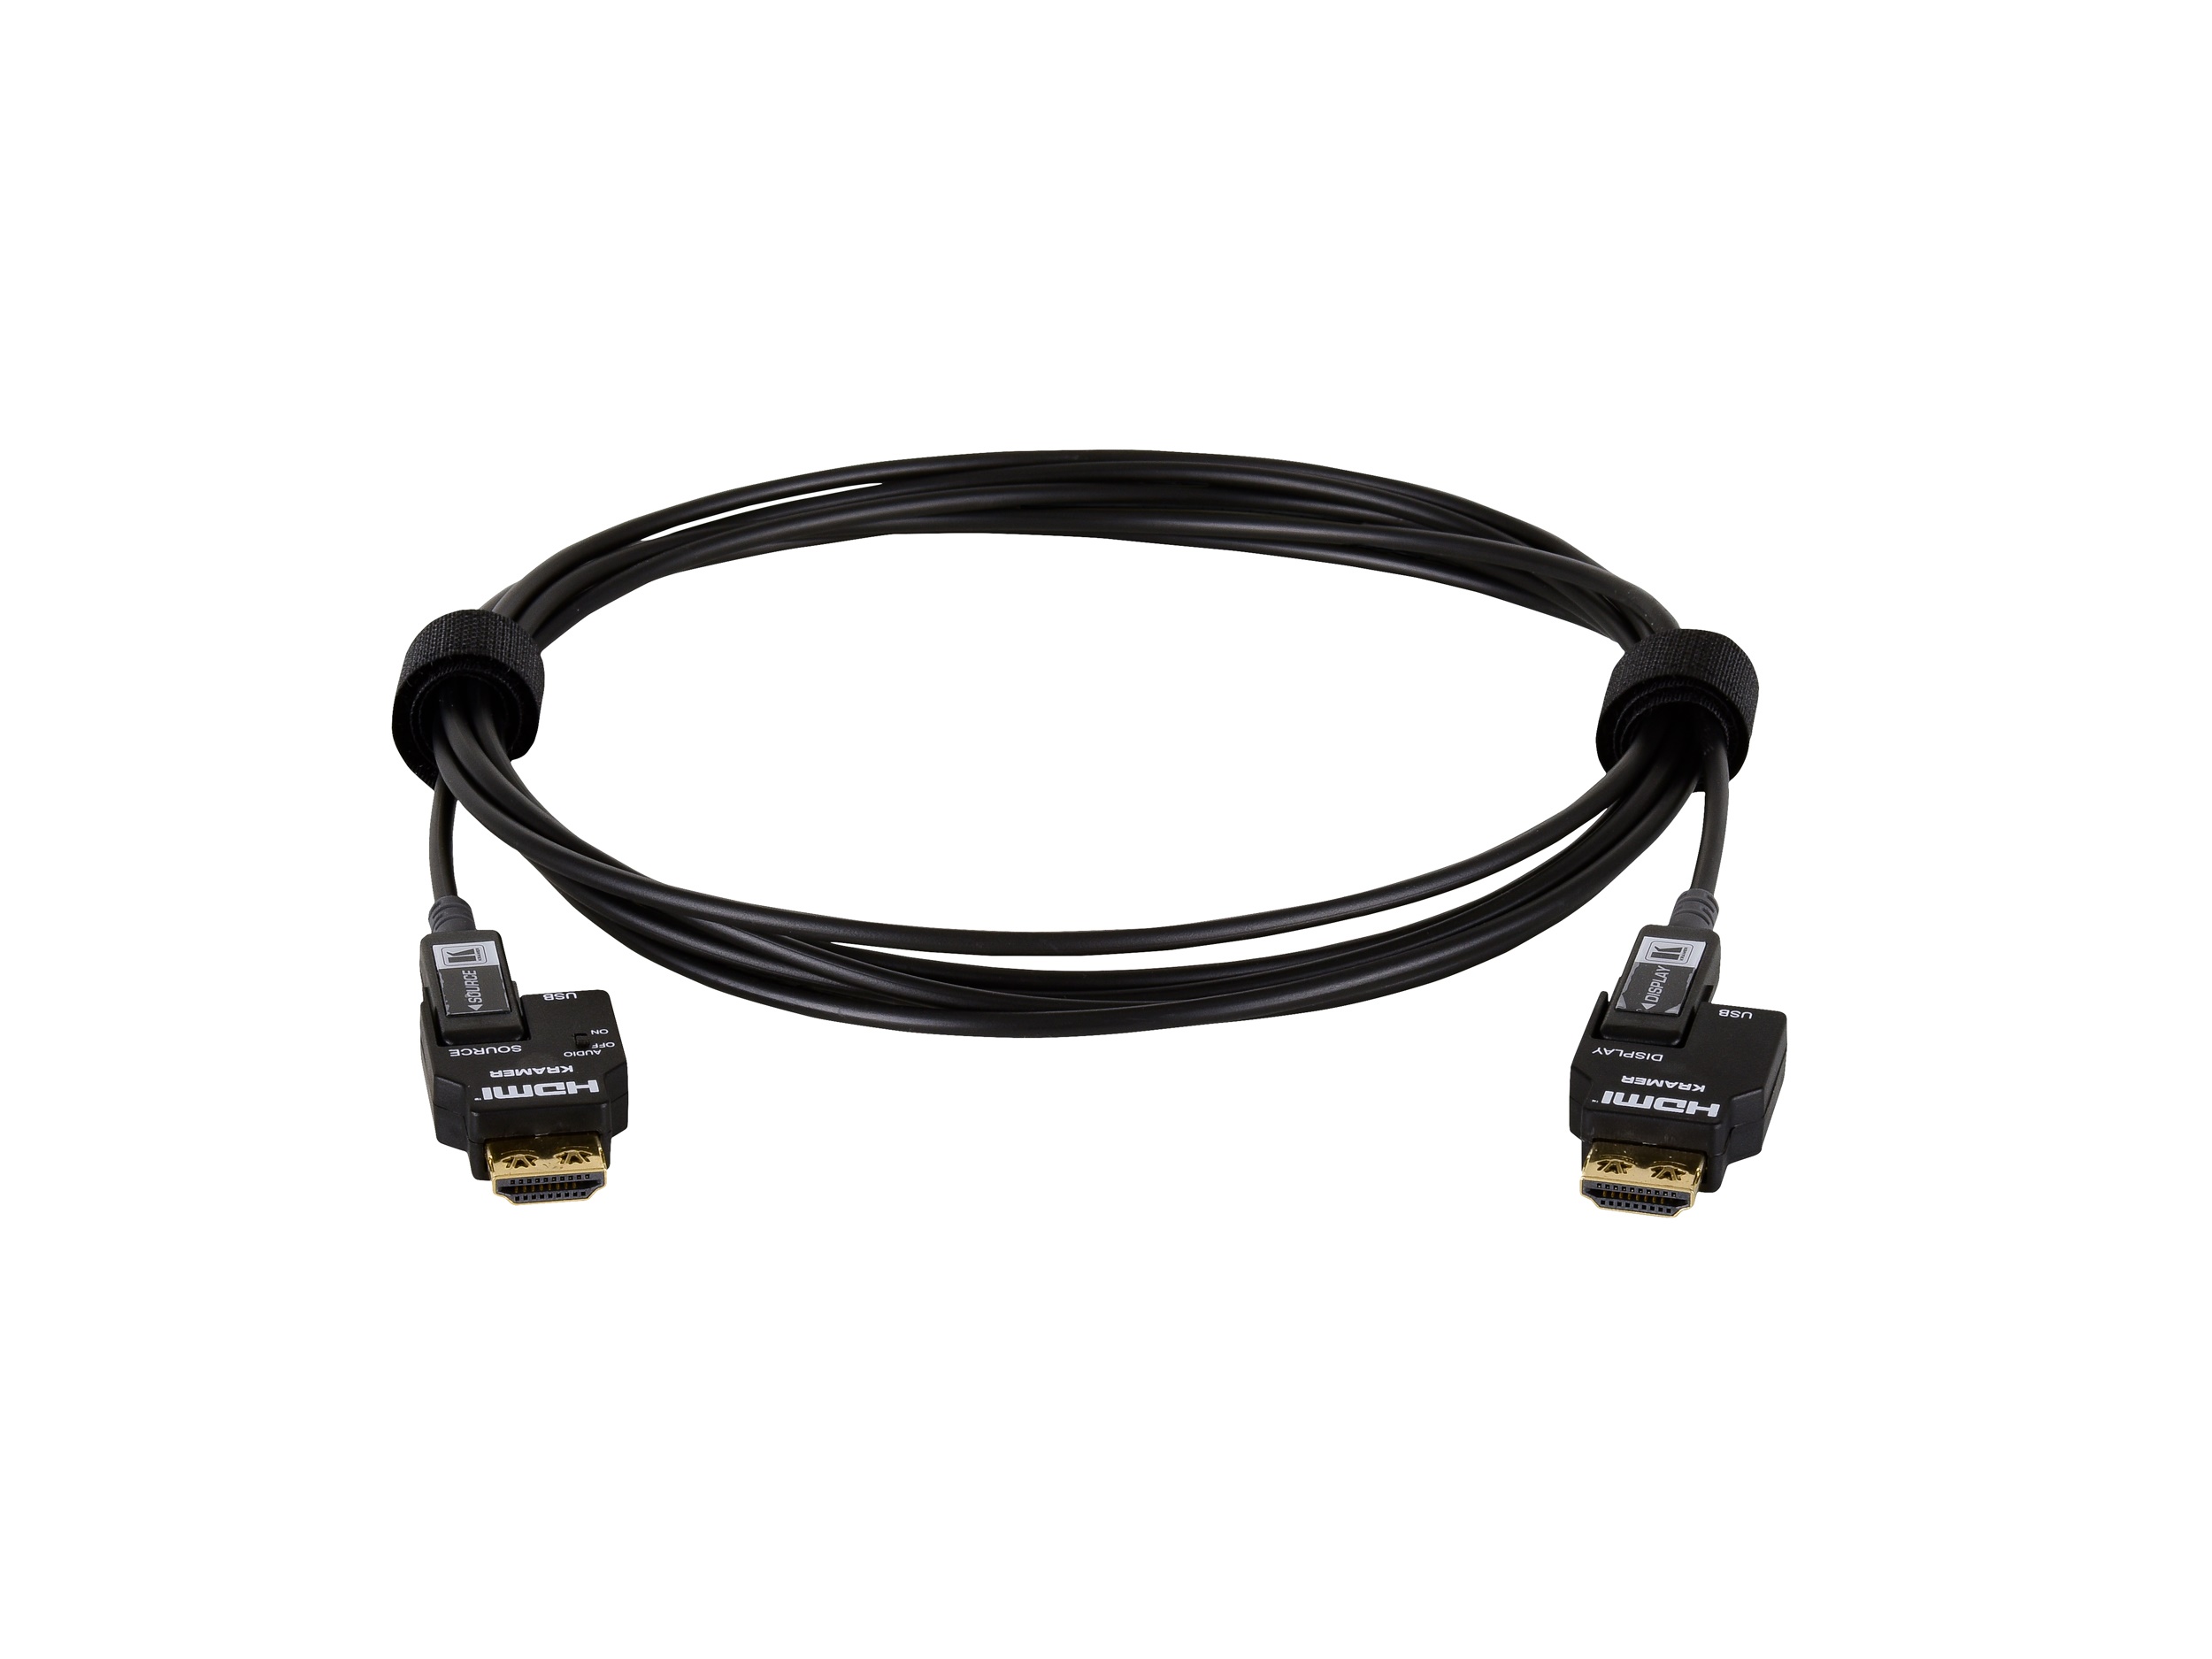 CRS-FIBERH-S1-50 15.2m/50ft 4K/60Hz (4x2x0) Secured Unidirectional 4K Pluggable HDMI Cable over Pure Fiber Cable by Kramer